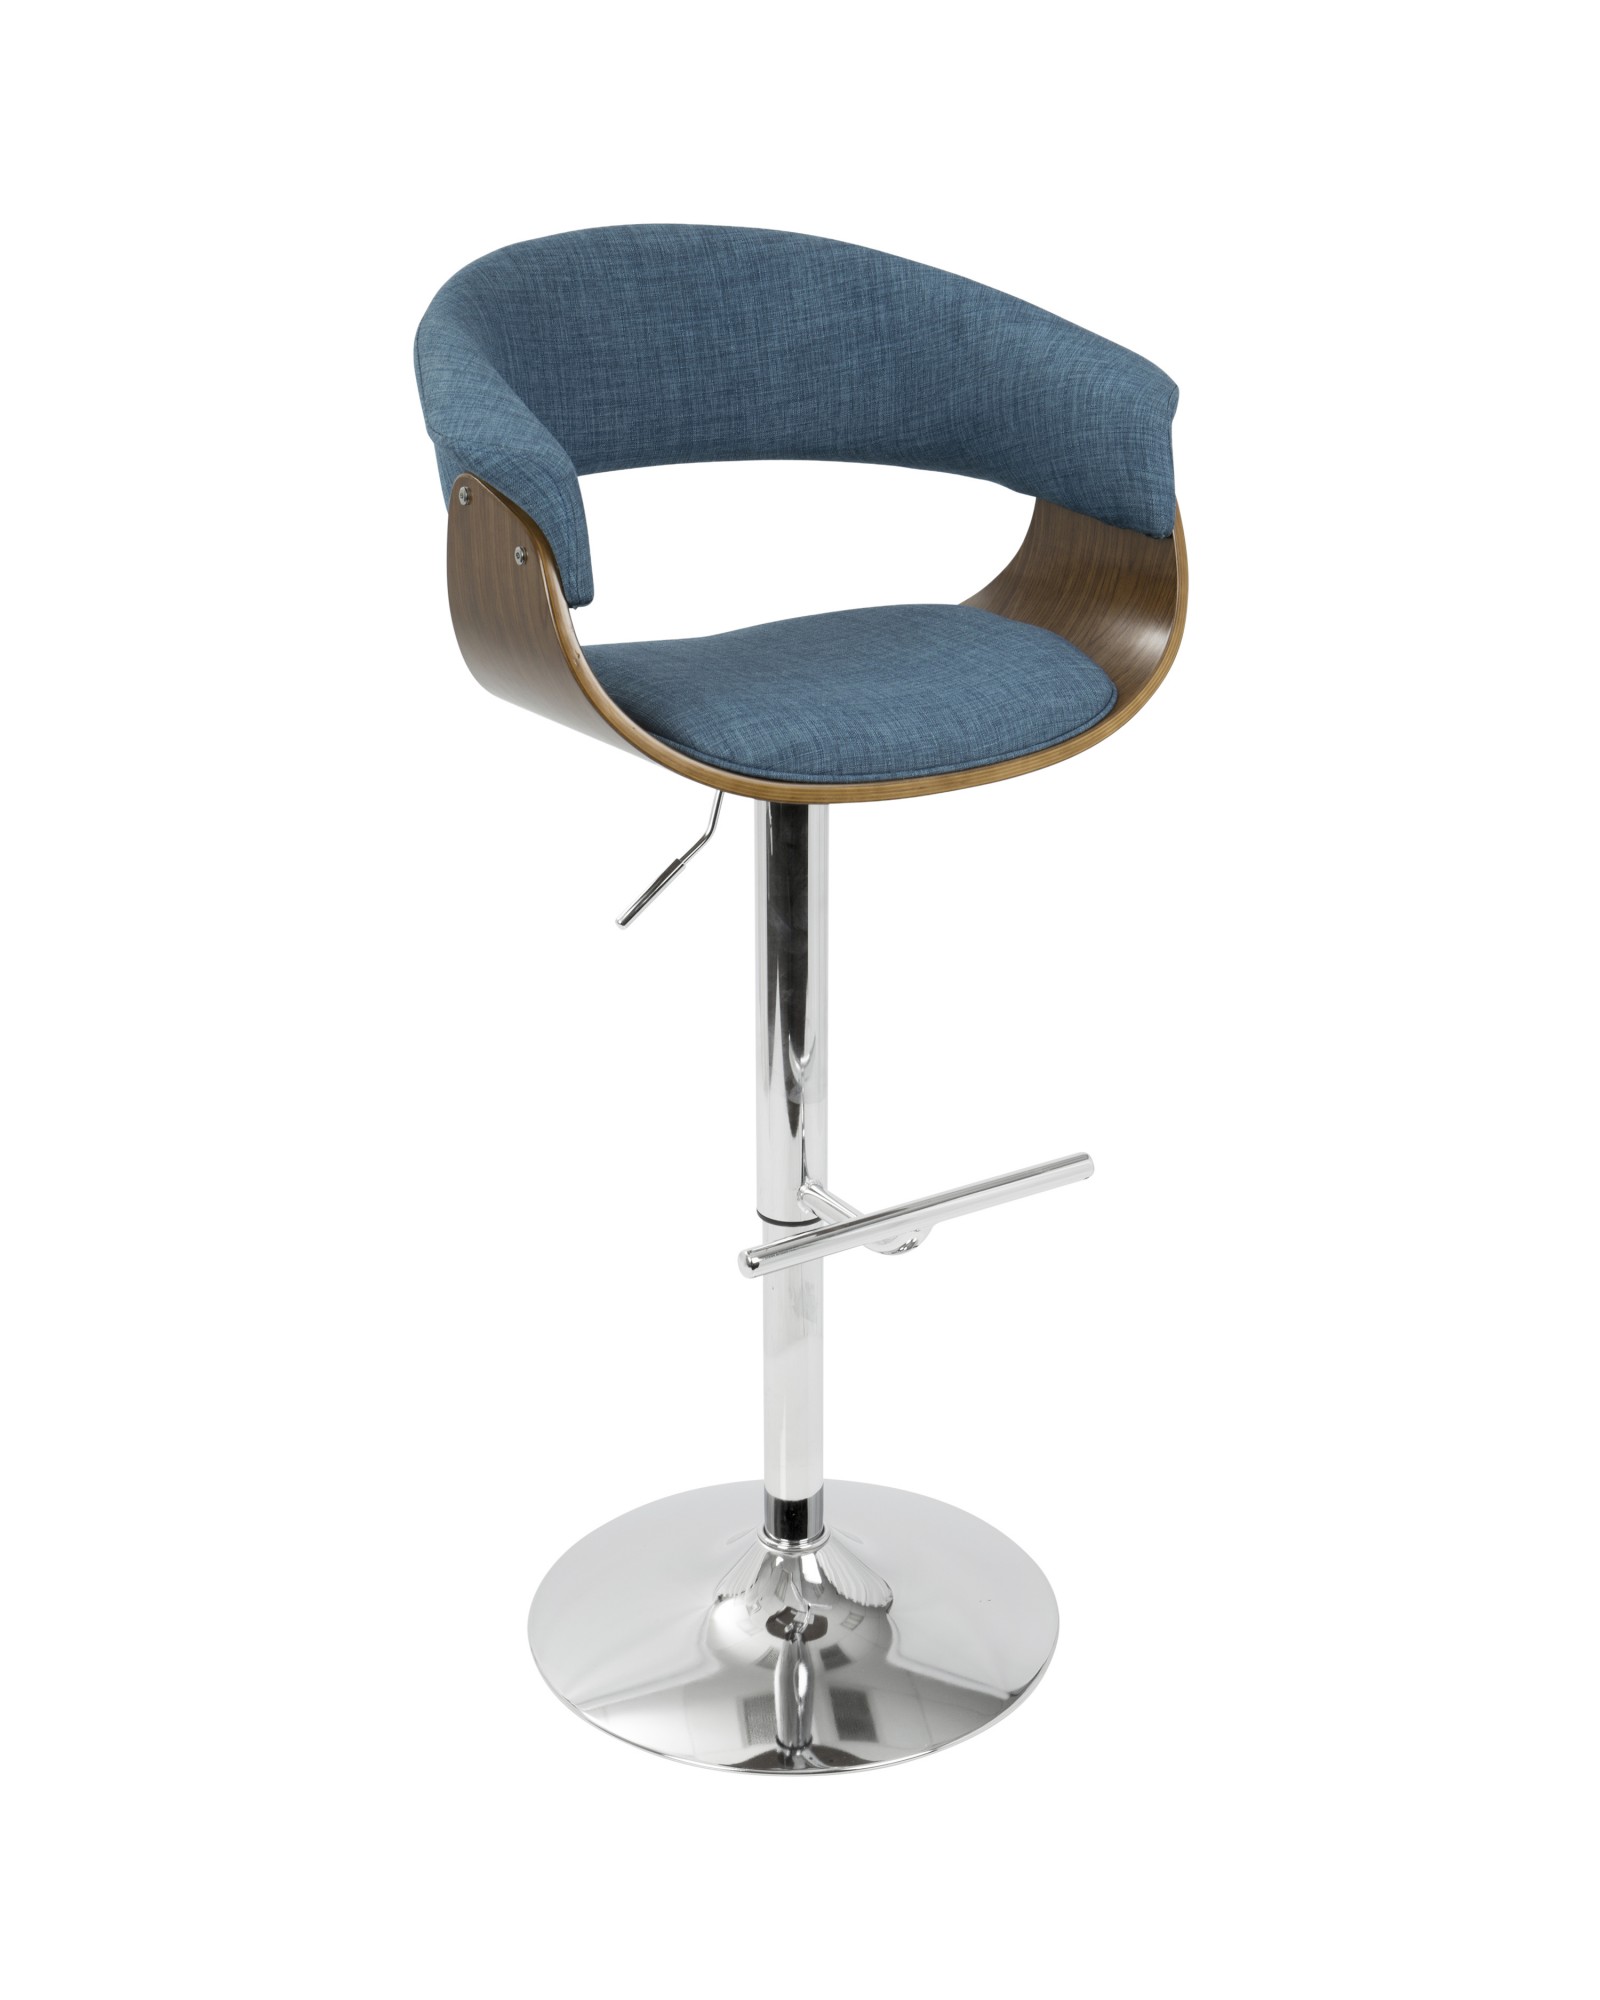 Vintage Mod Mid-Century Modern Adjustable Barstool with Swivel in Walnut and Blue Fabric